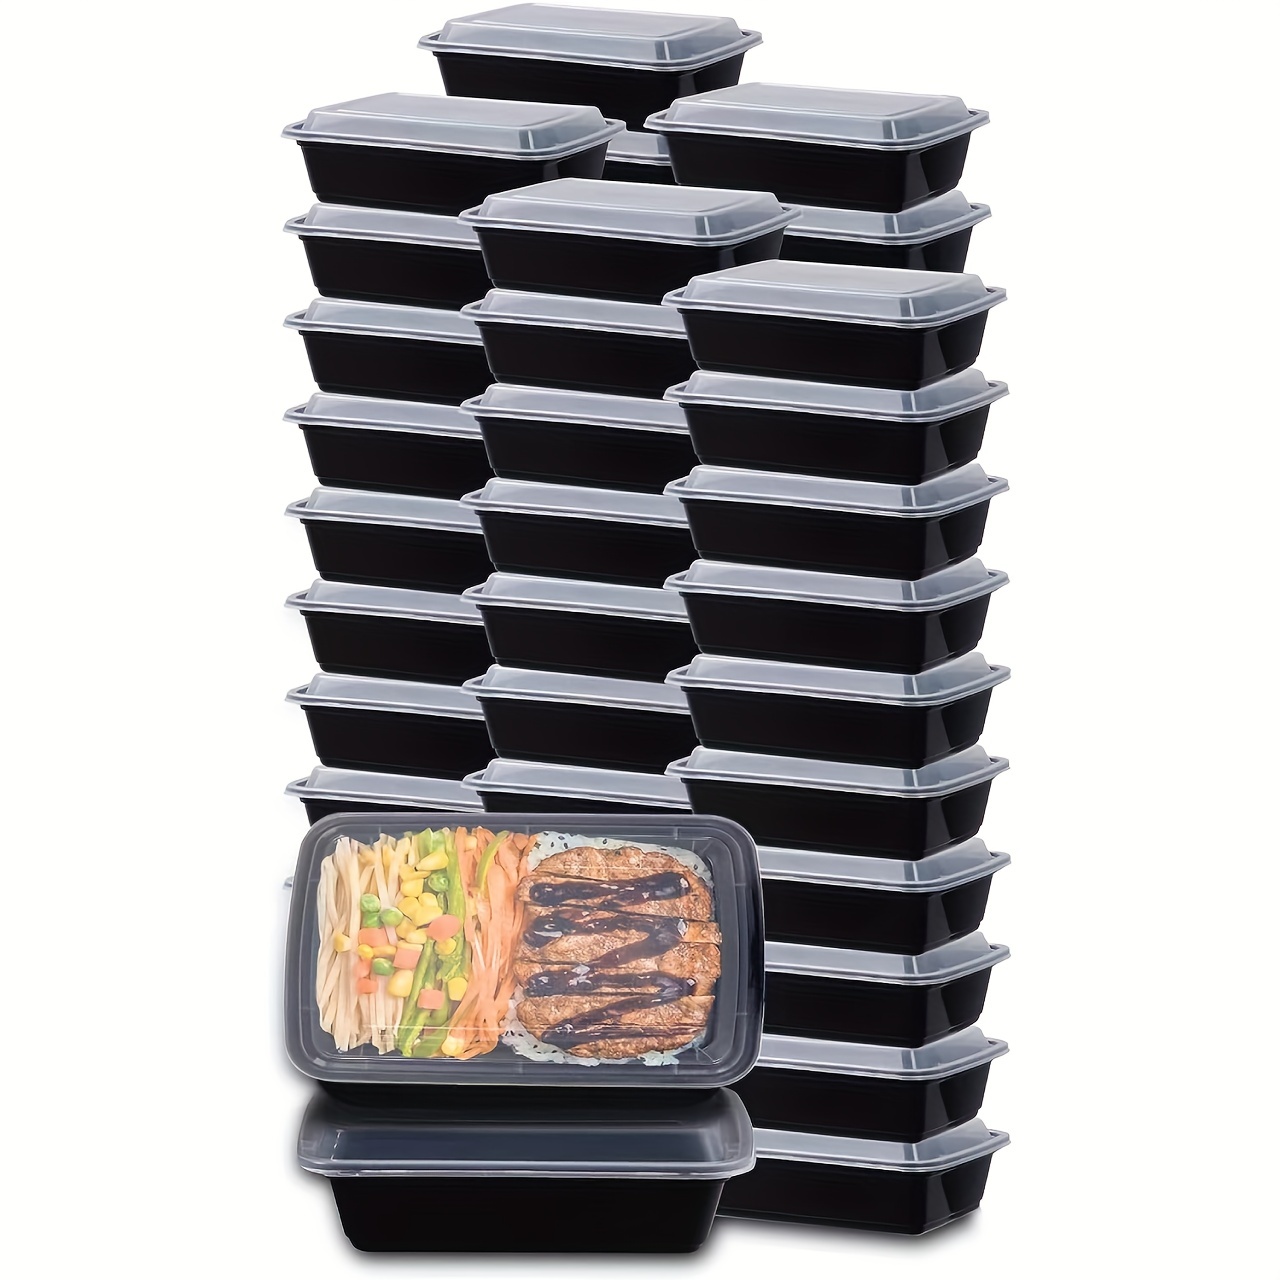 50pcs, Meal Prep Containers, 26 OZ Microwavable Reusable Food Containers  With Lids For Food Prepping, Disposable Lunch Boxes, Plastic Food Boxes,  Stackable, Freezer Dishwasher Safe, Kitchen Gadgets, Kitchen Accessories